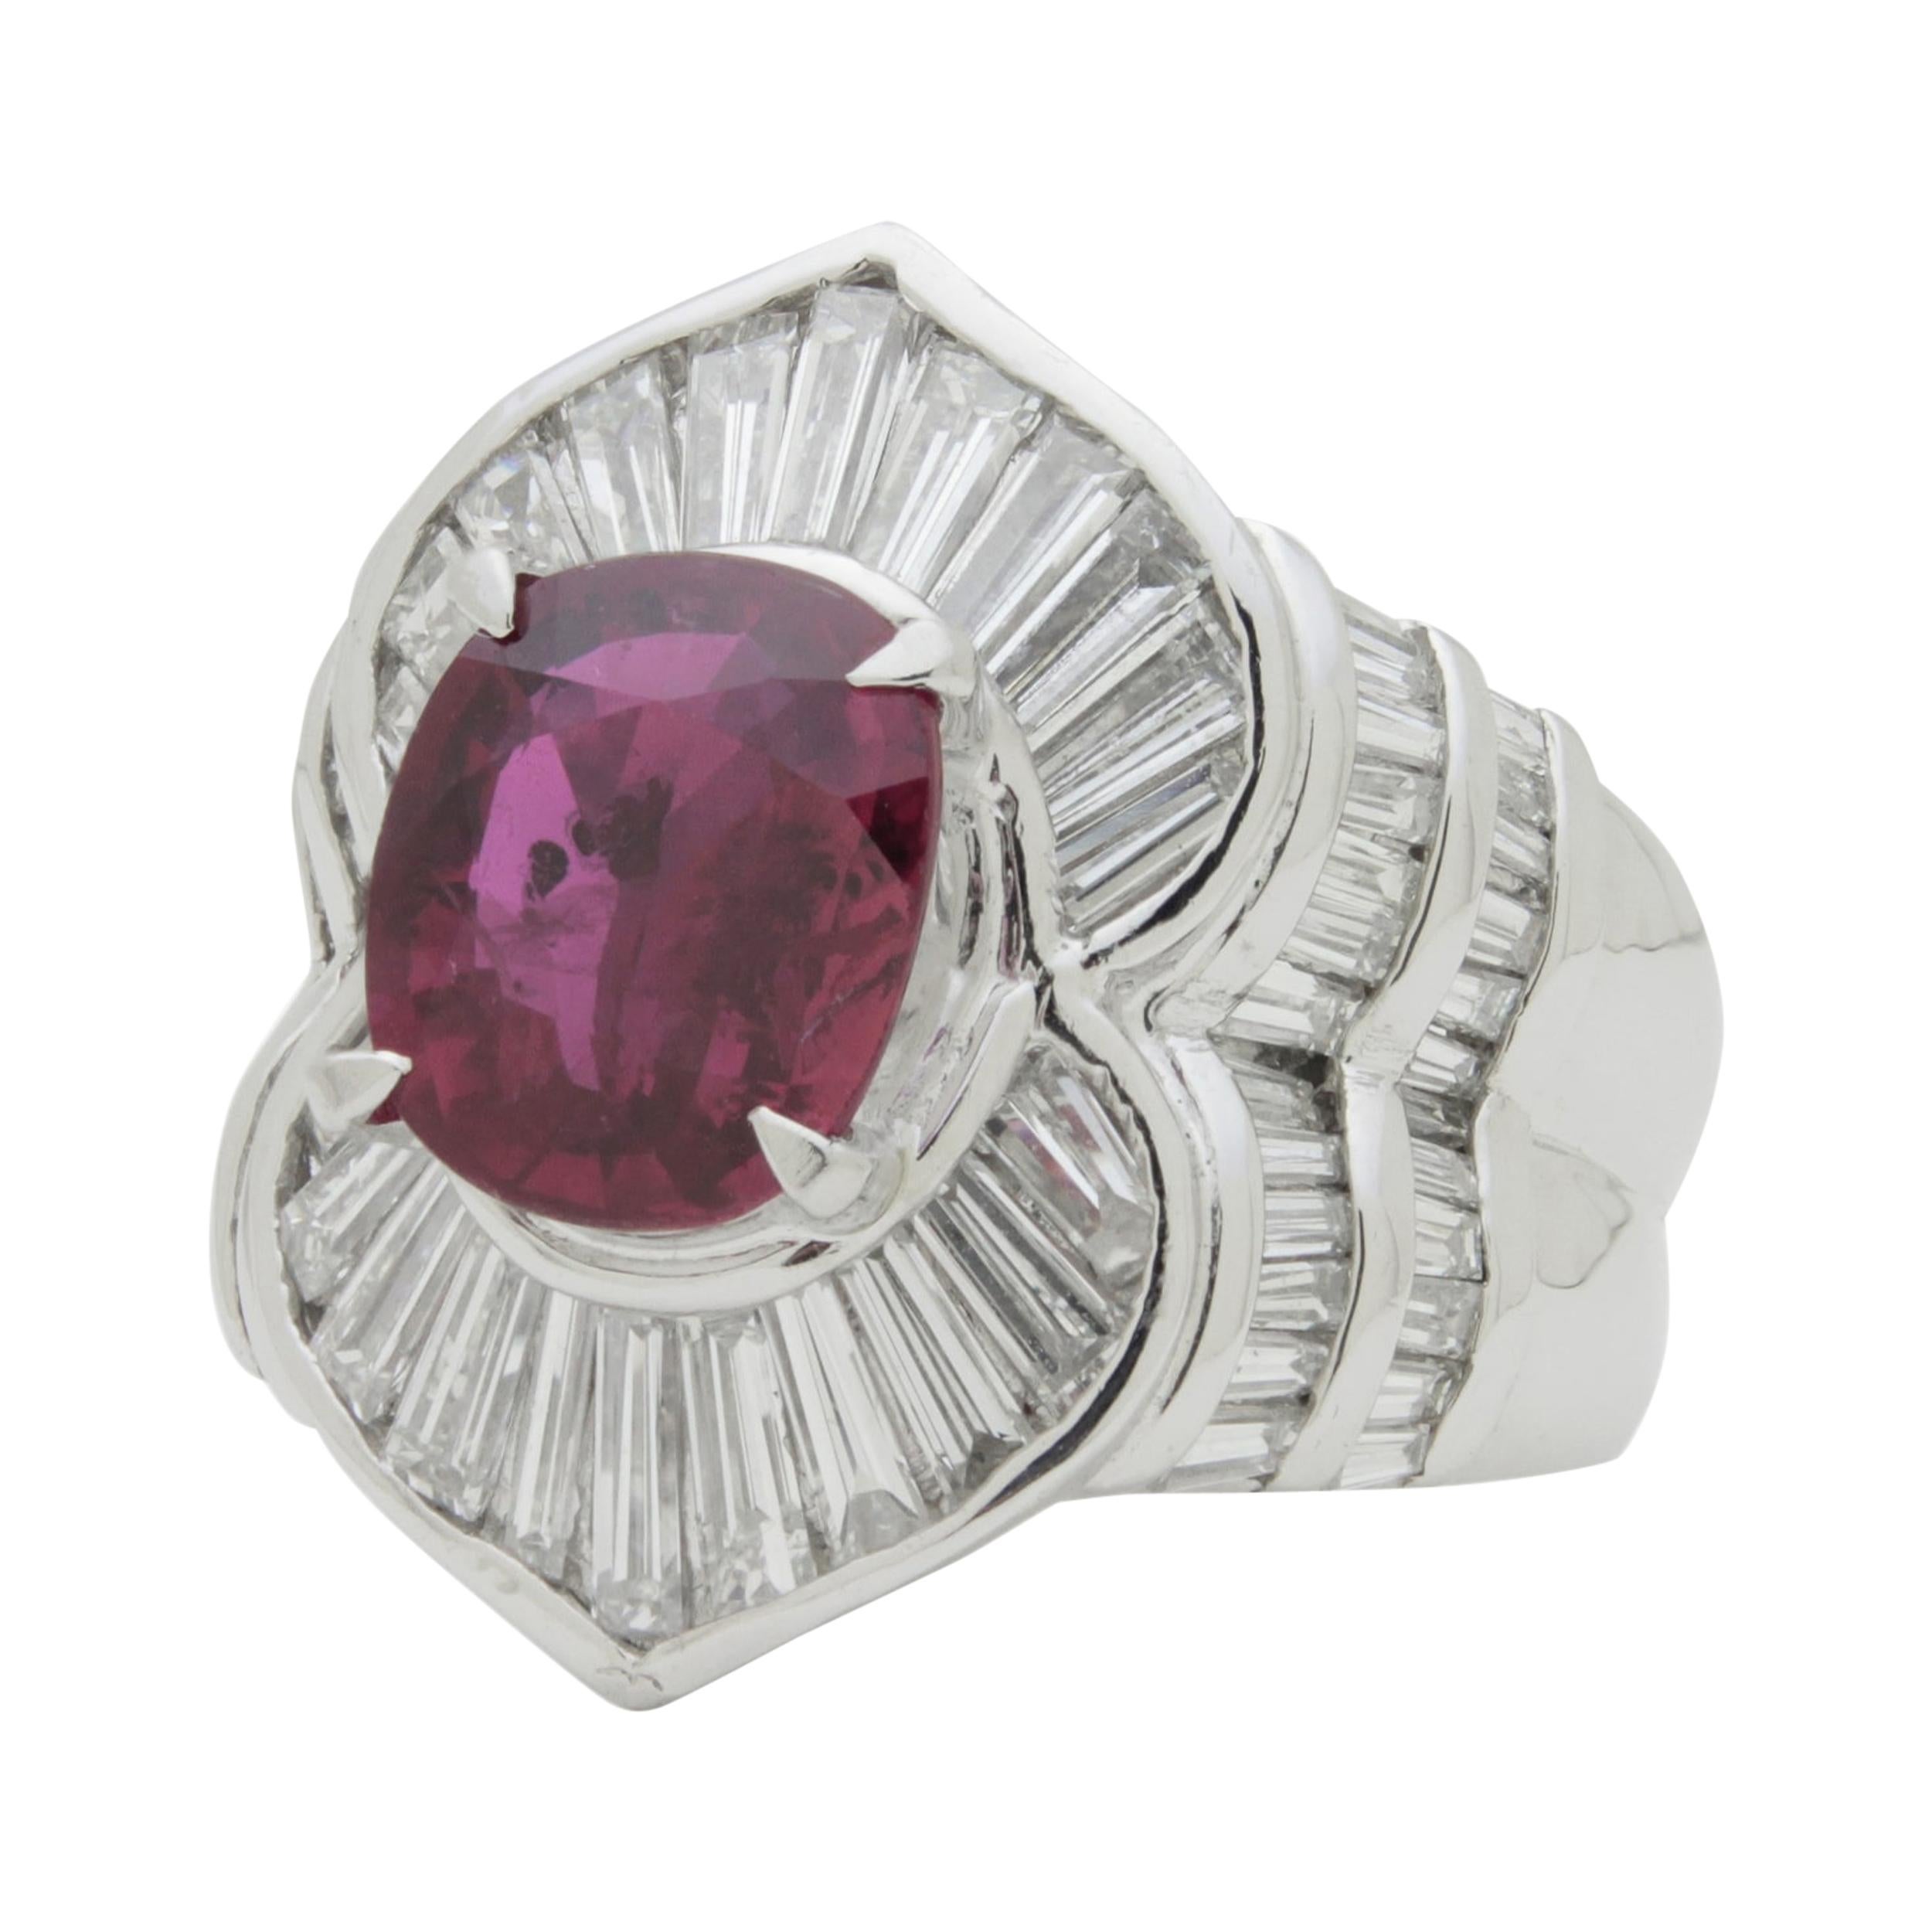 Impressive Platinum, Diamond, and GIA Certified Ruby Ring For Sale